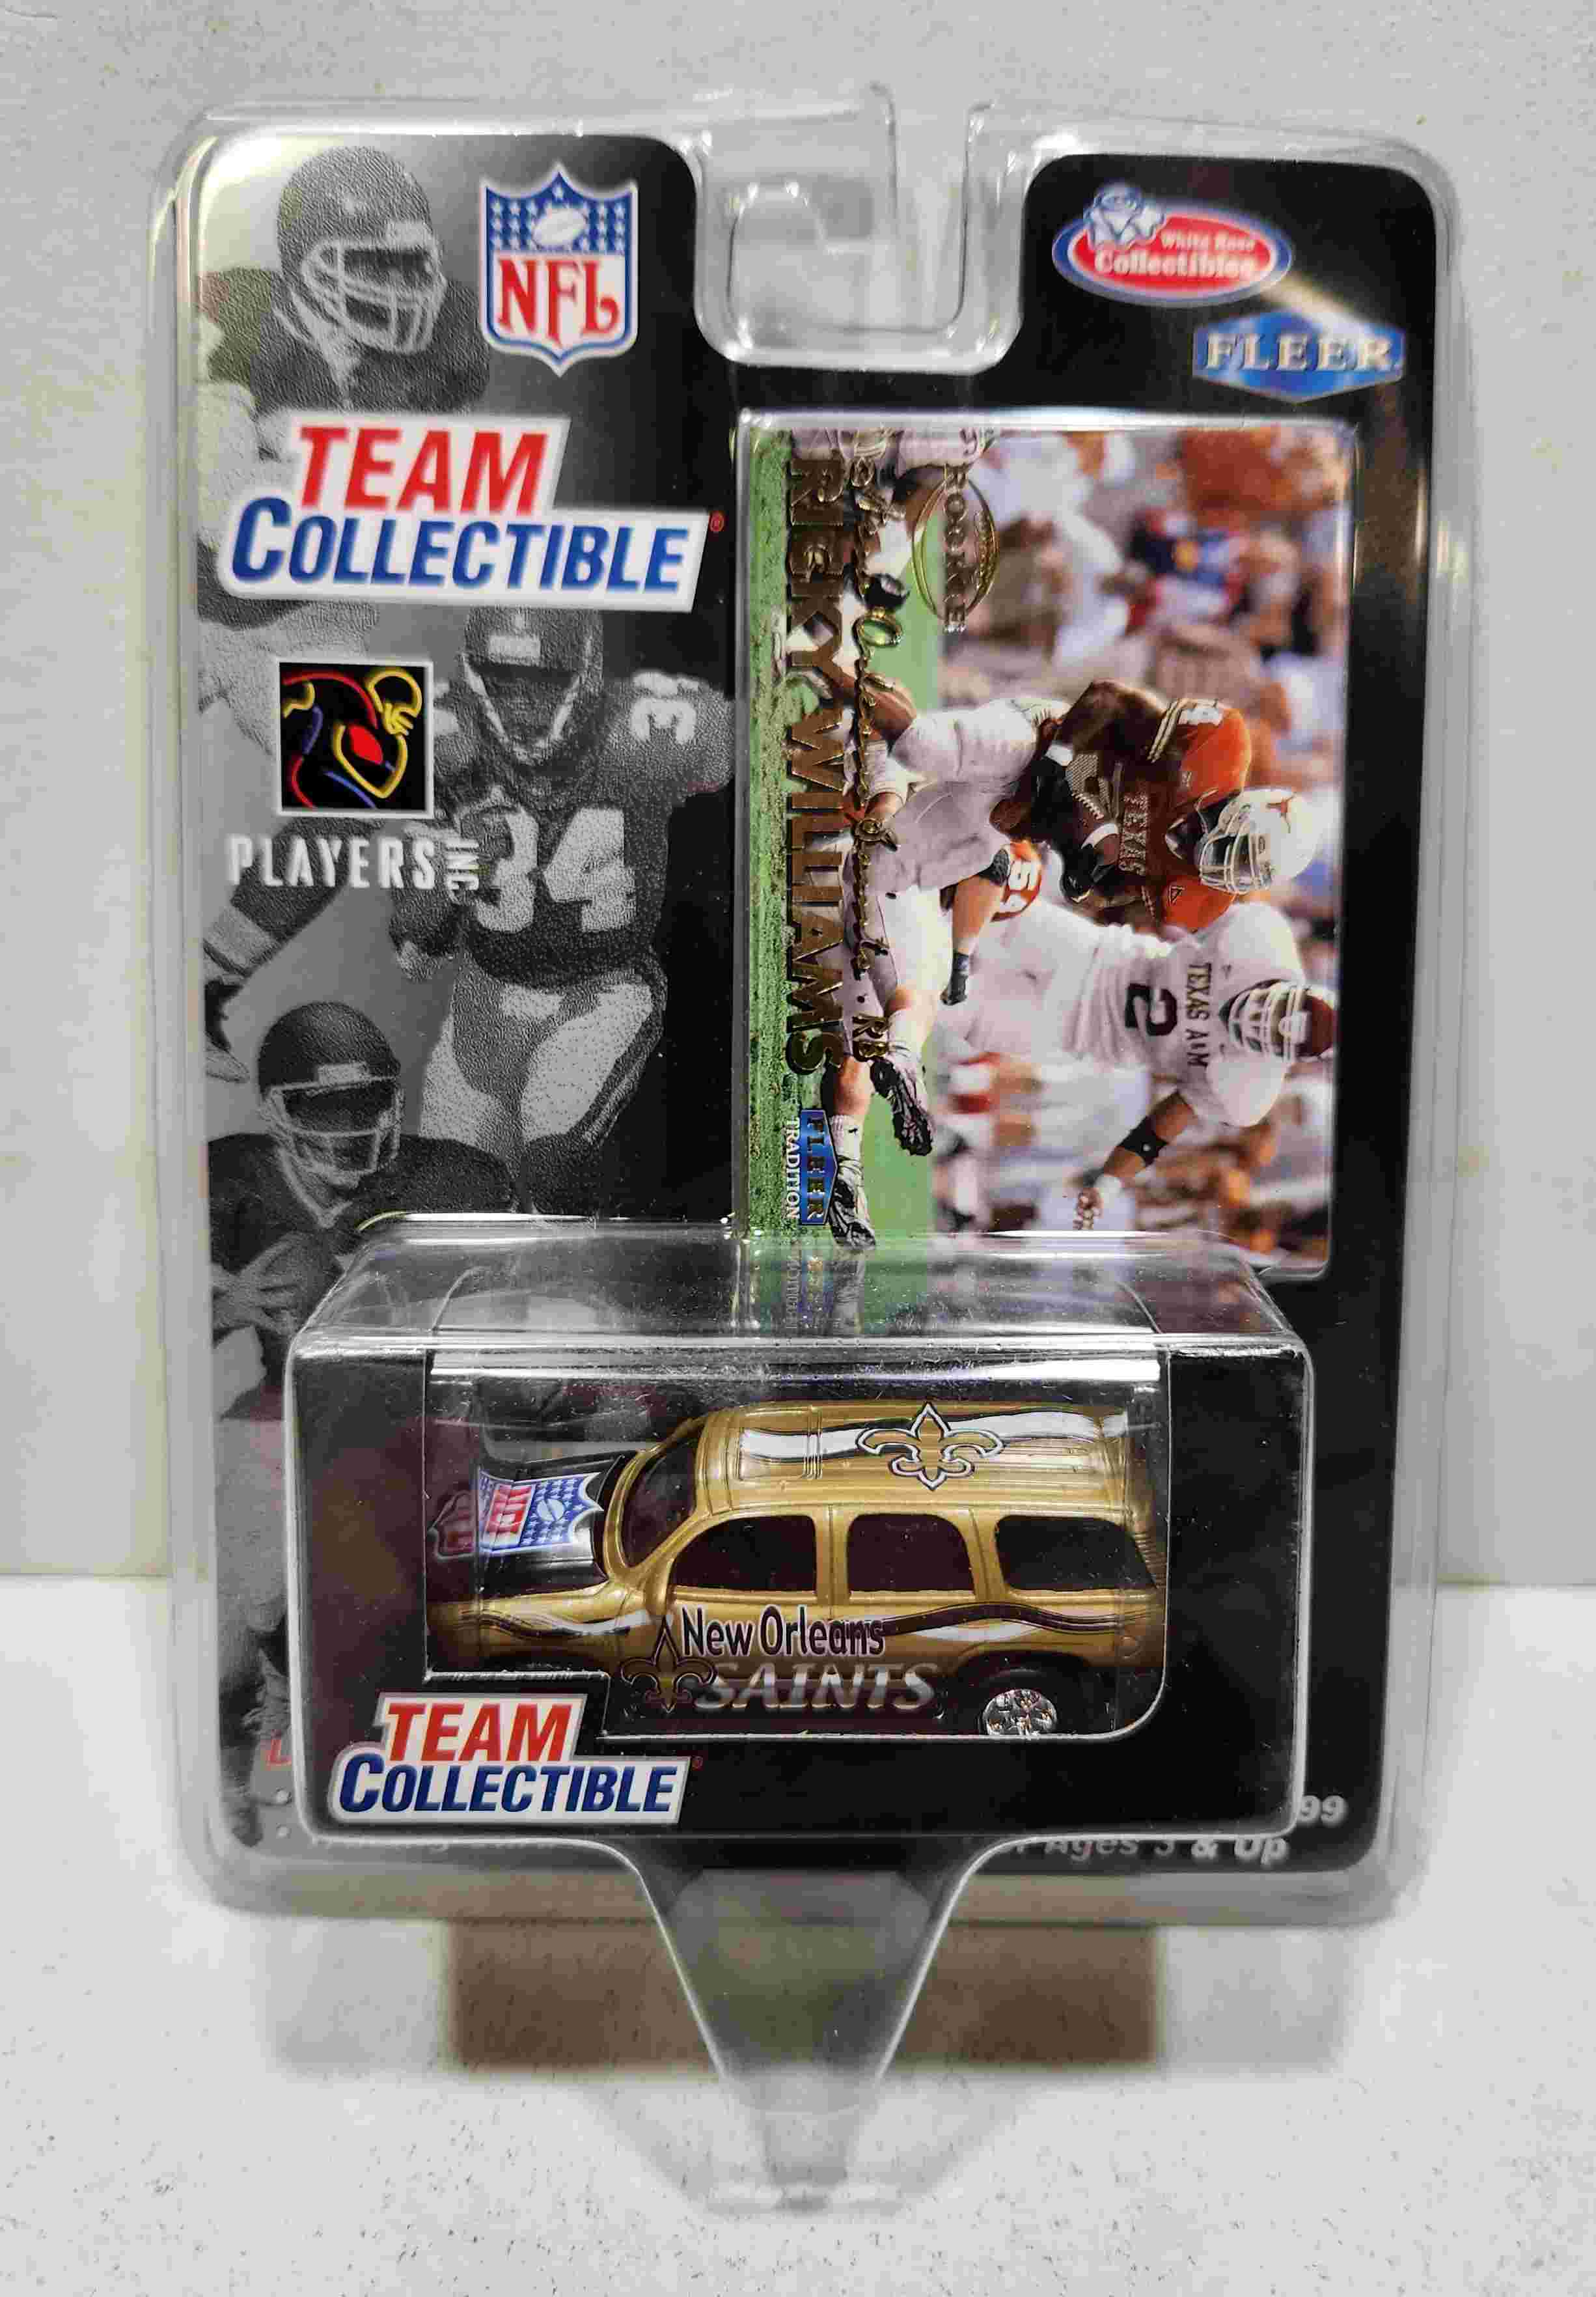 1999 New Orleans Saints 1/64th Yukon with Ricky Williams trading card